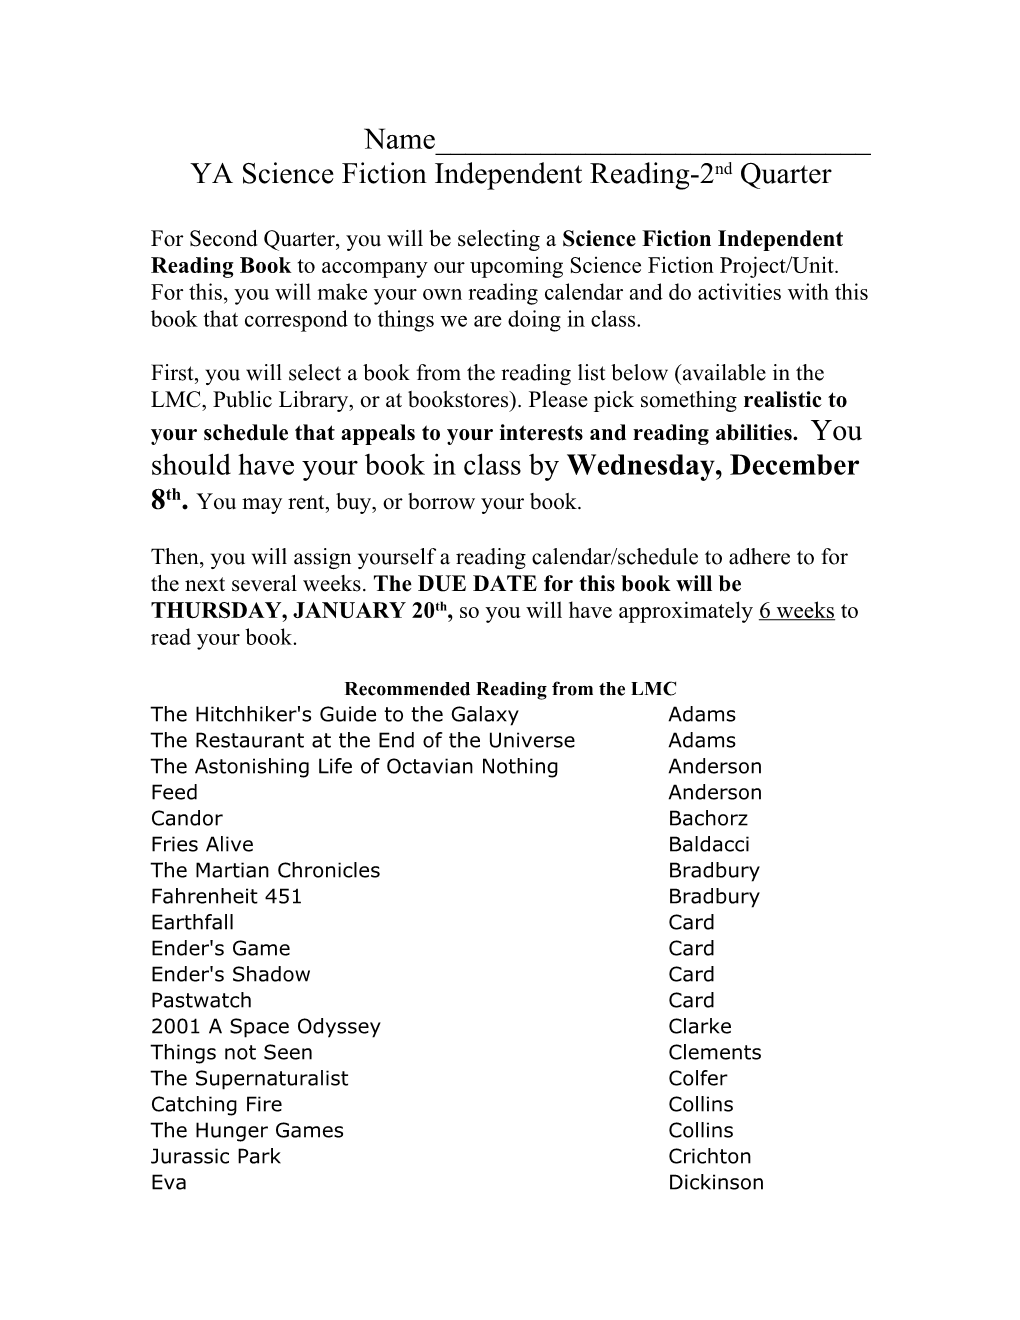 YA Science Fiction Independent Reading-2Nd Quarter